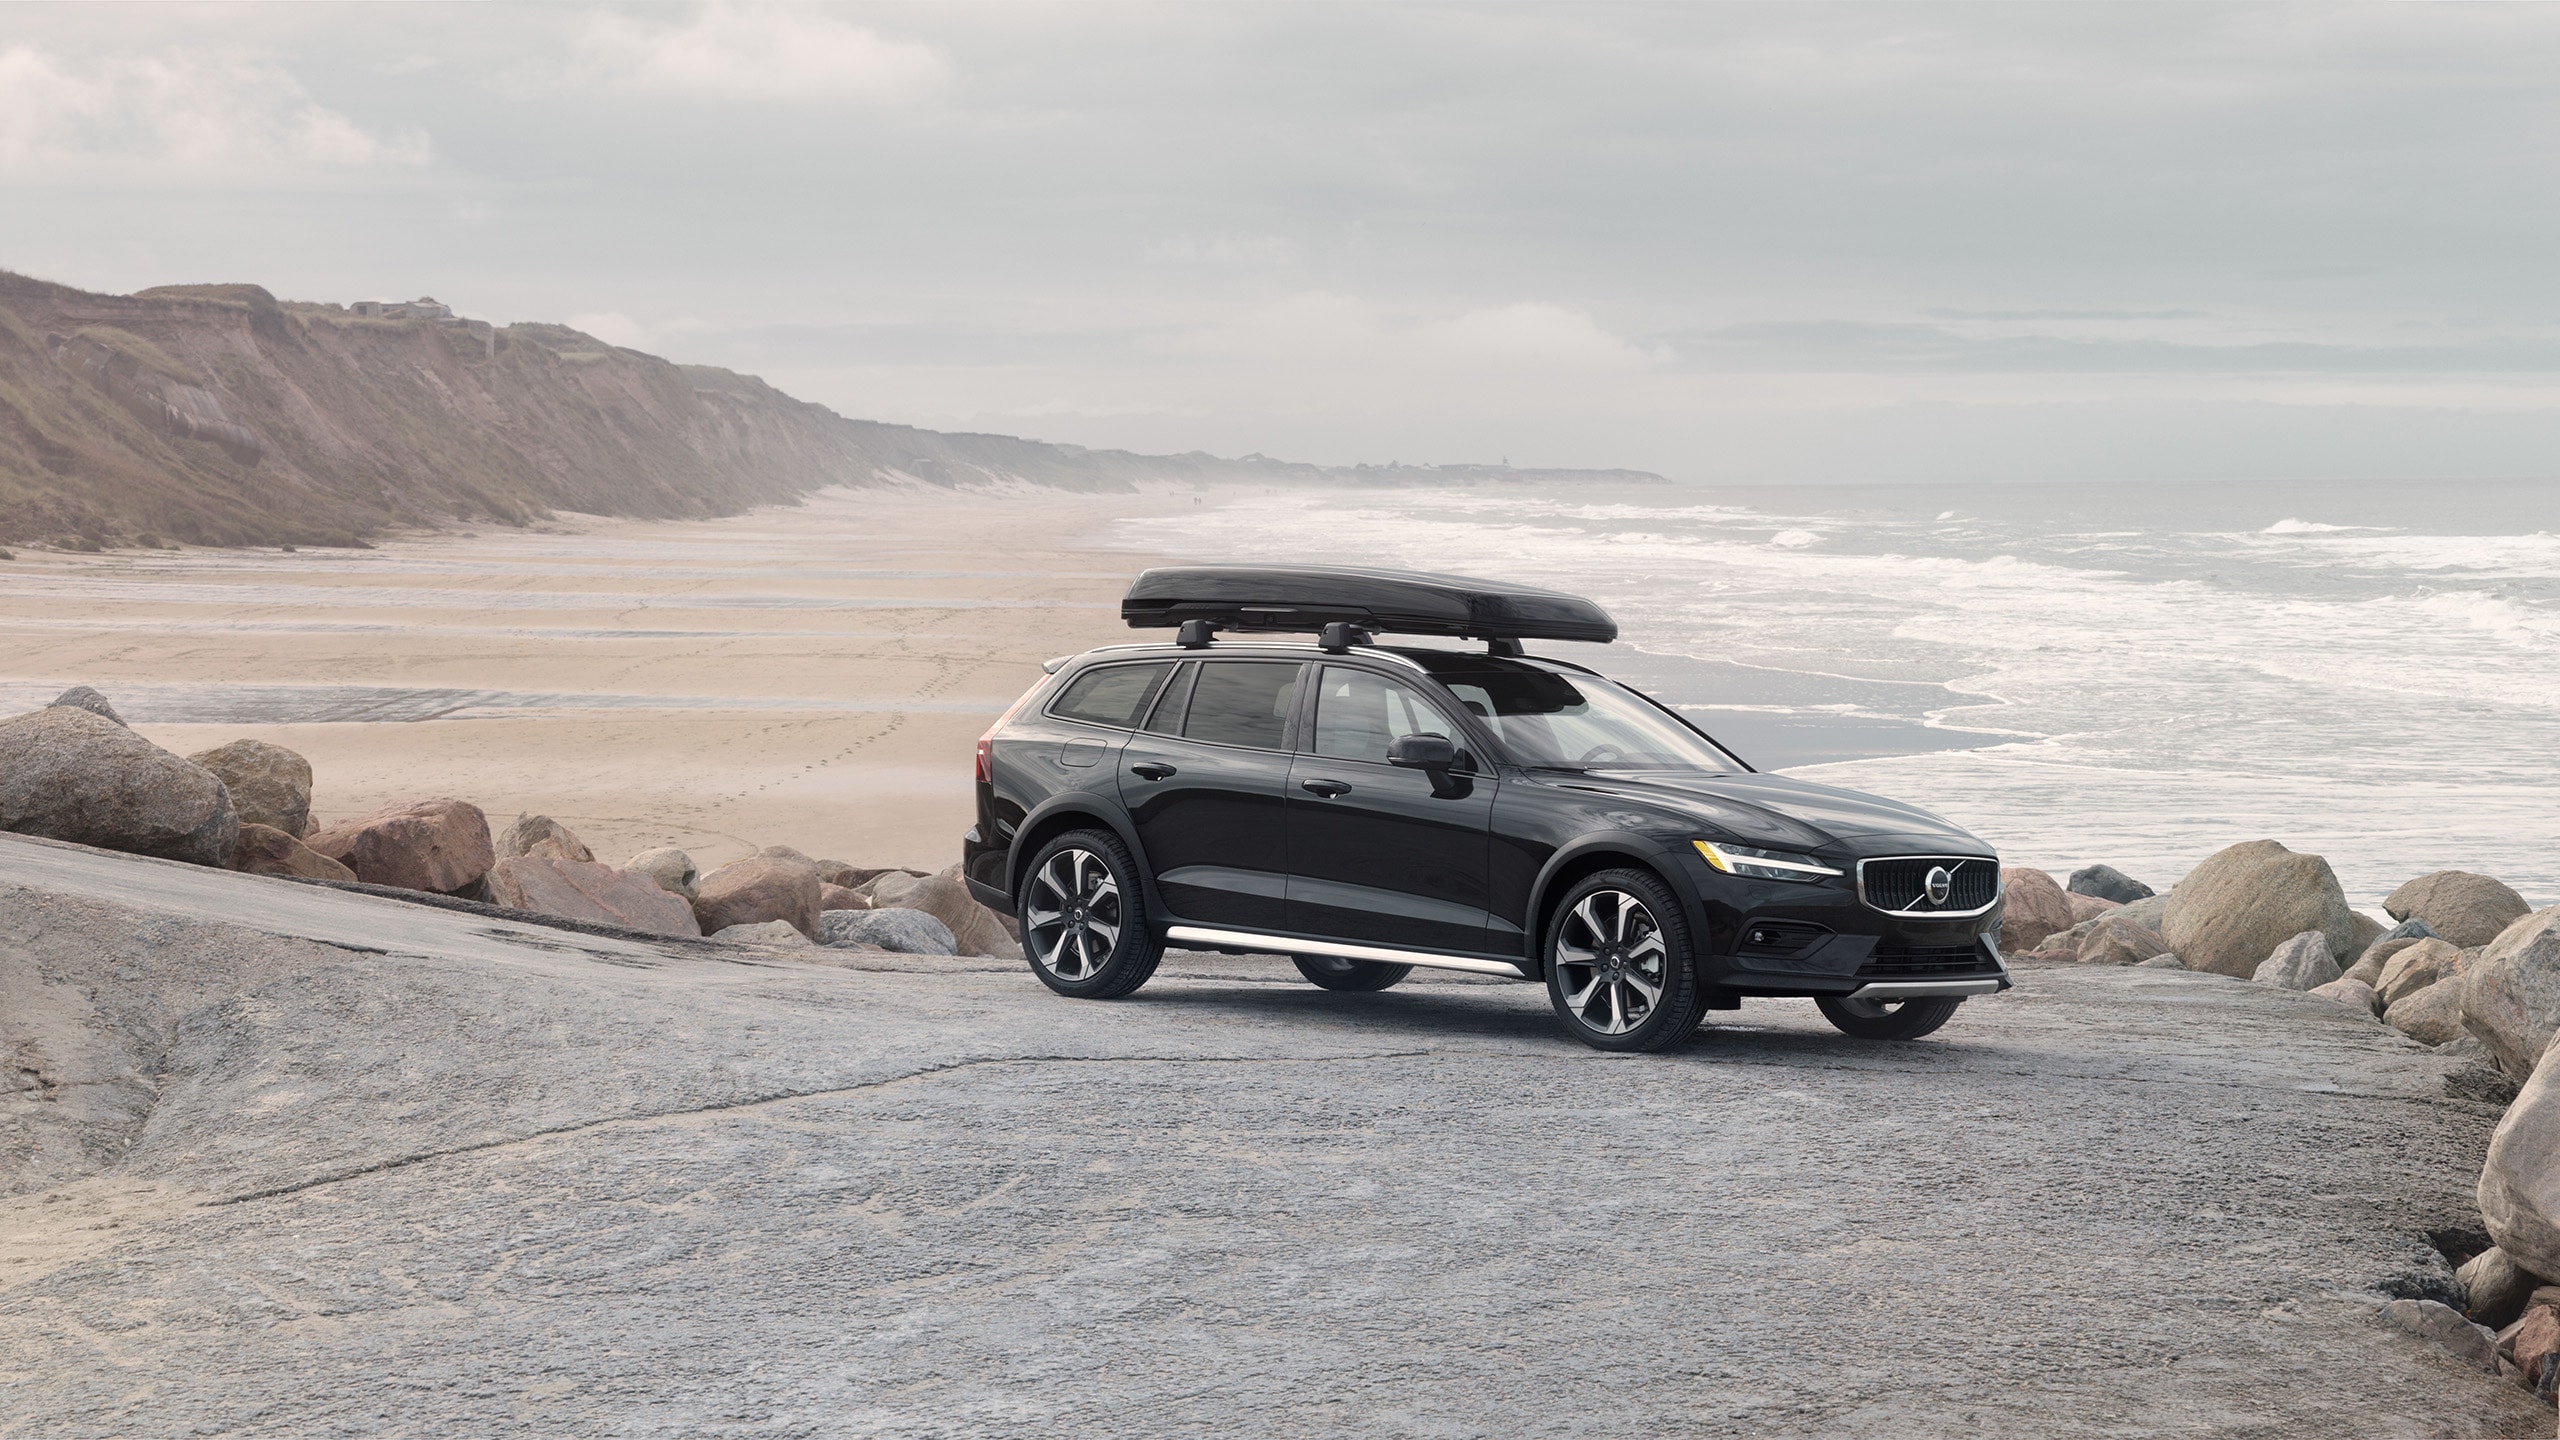 Volvo Overseas Roadside Assistance Europe - SUV parked by a beach